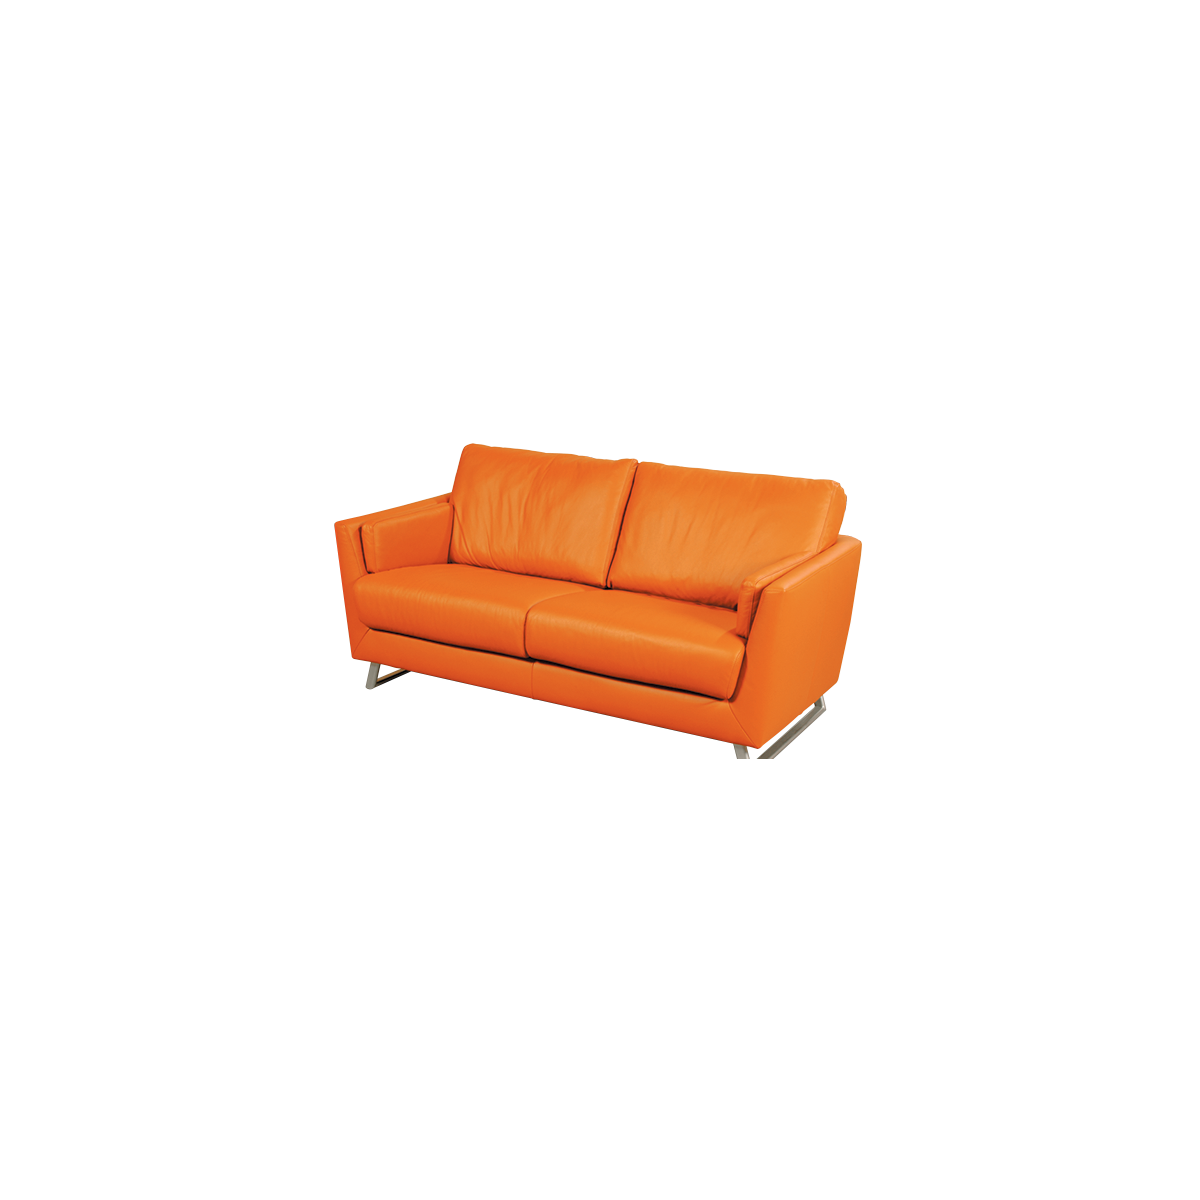 How to Care for Leather Sofas